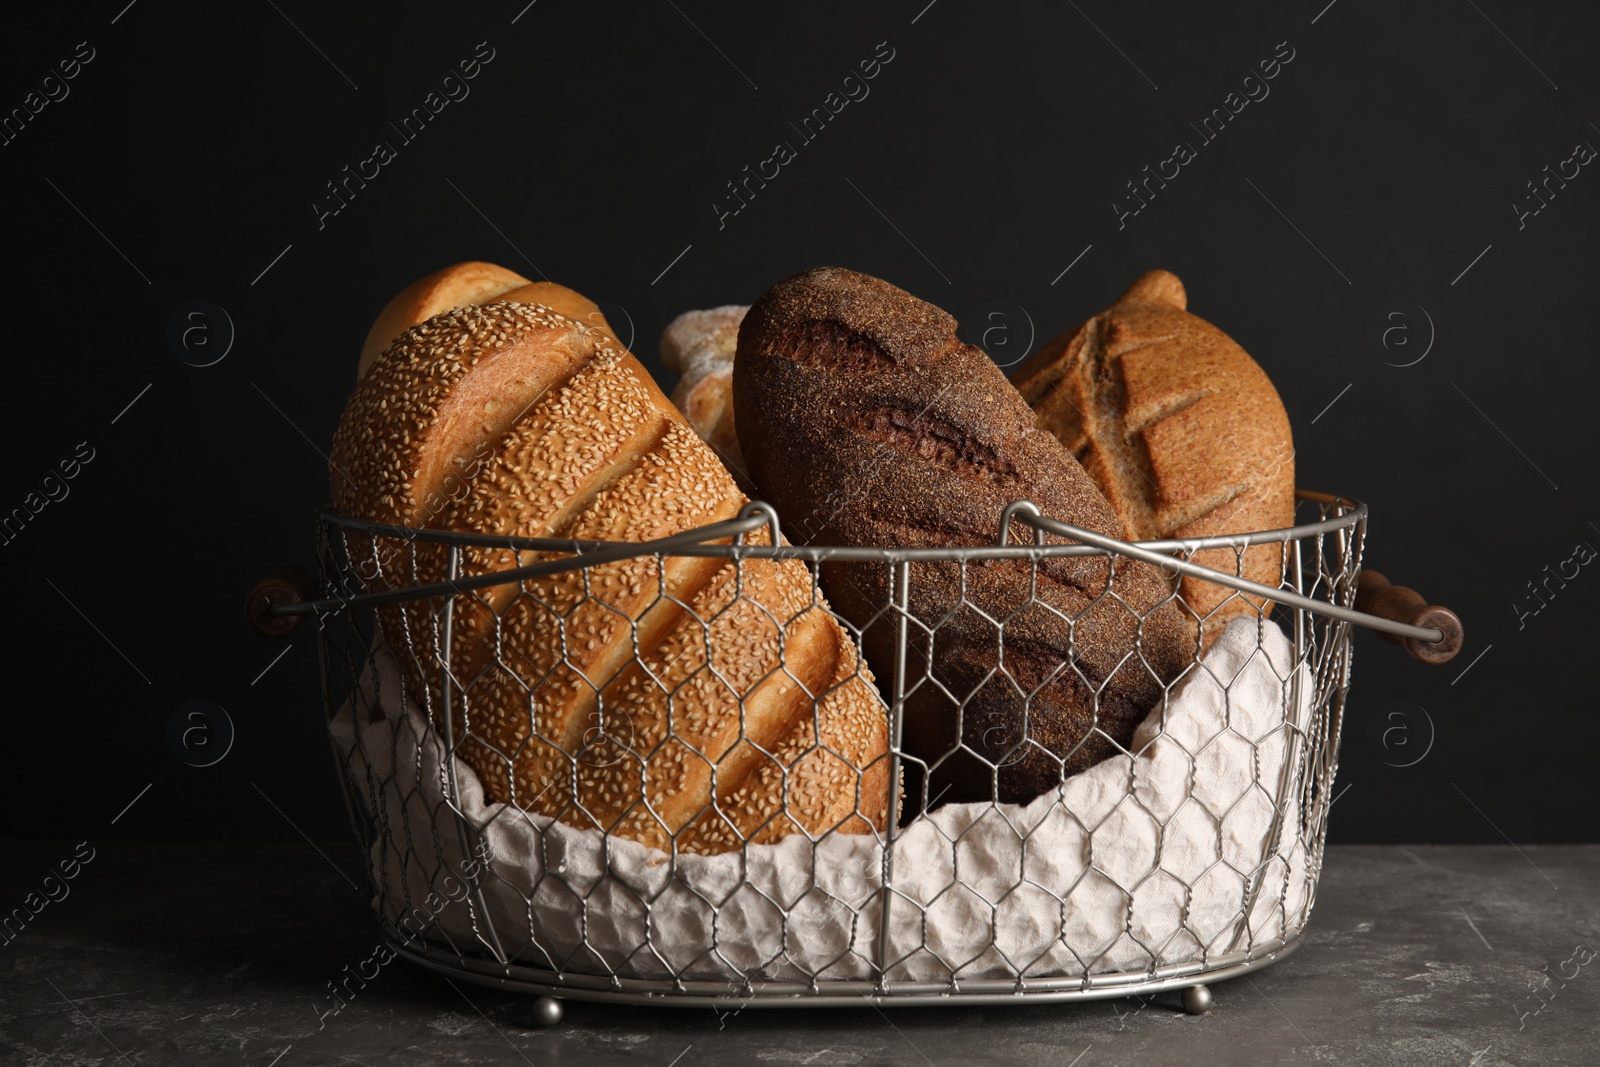 Photo of Basket with fresh bread on table against black background